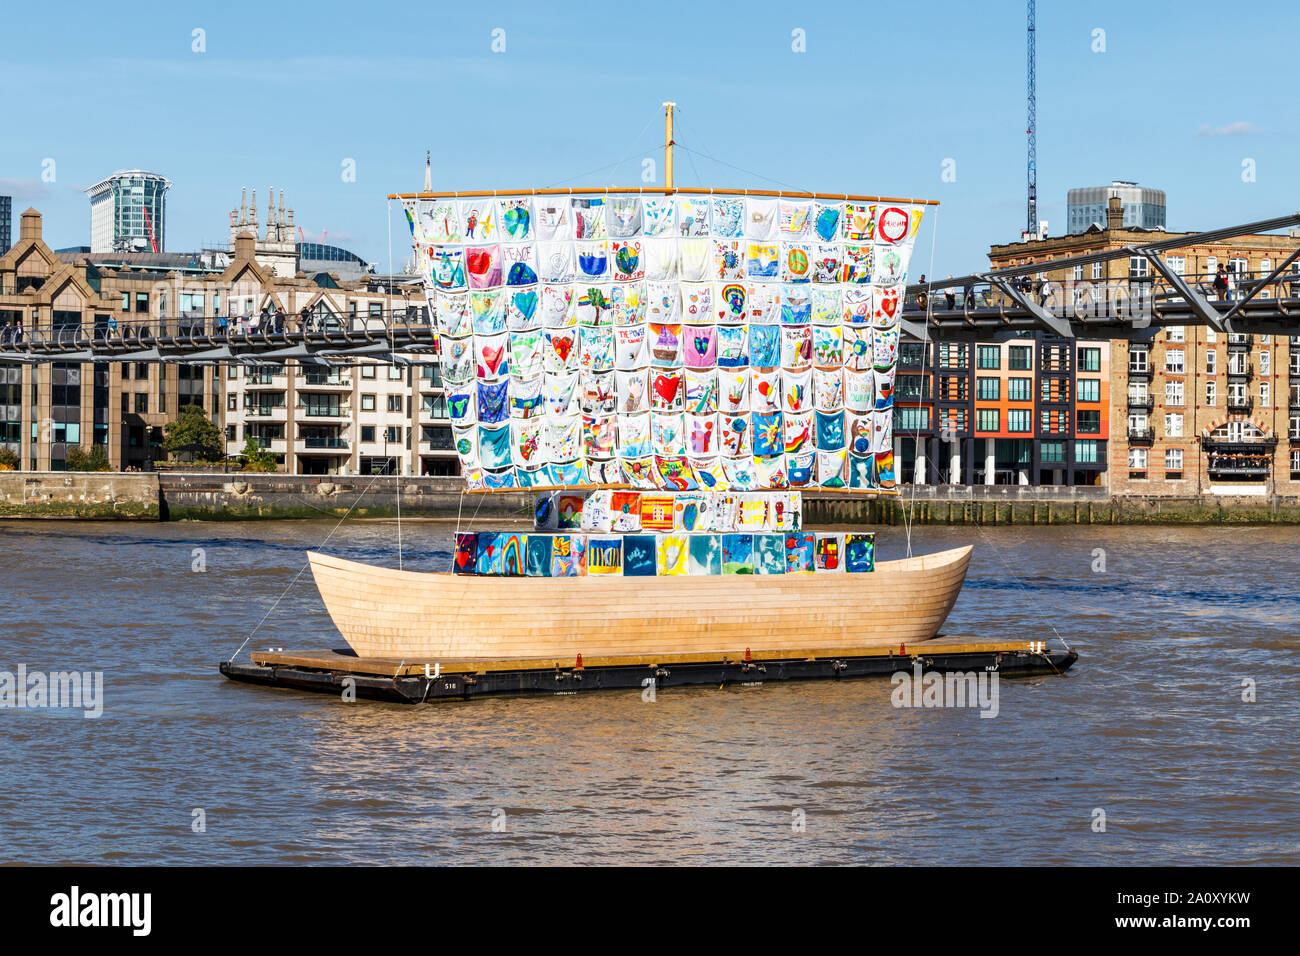 The Ship of Tolerance, a work by the Ilya and Emilia Kabakov Foundation, in the River Thames at Bankside, London, UK Stock Photo